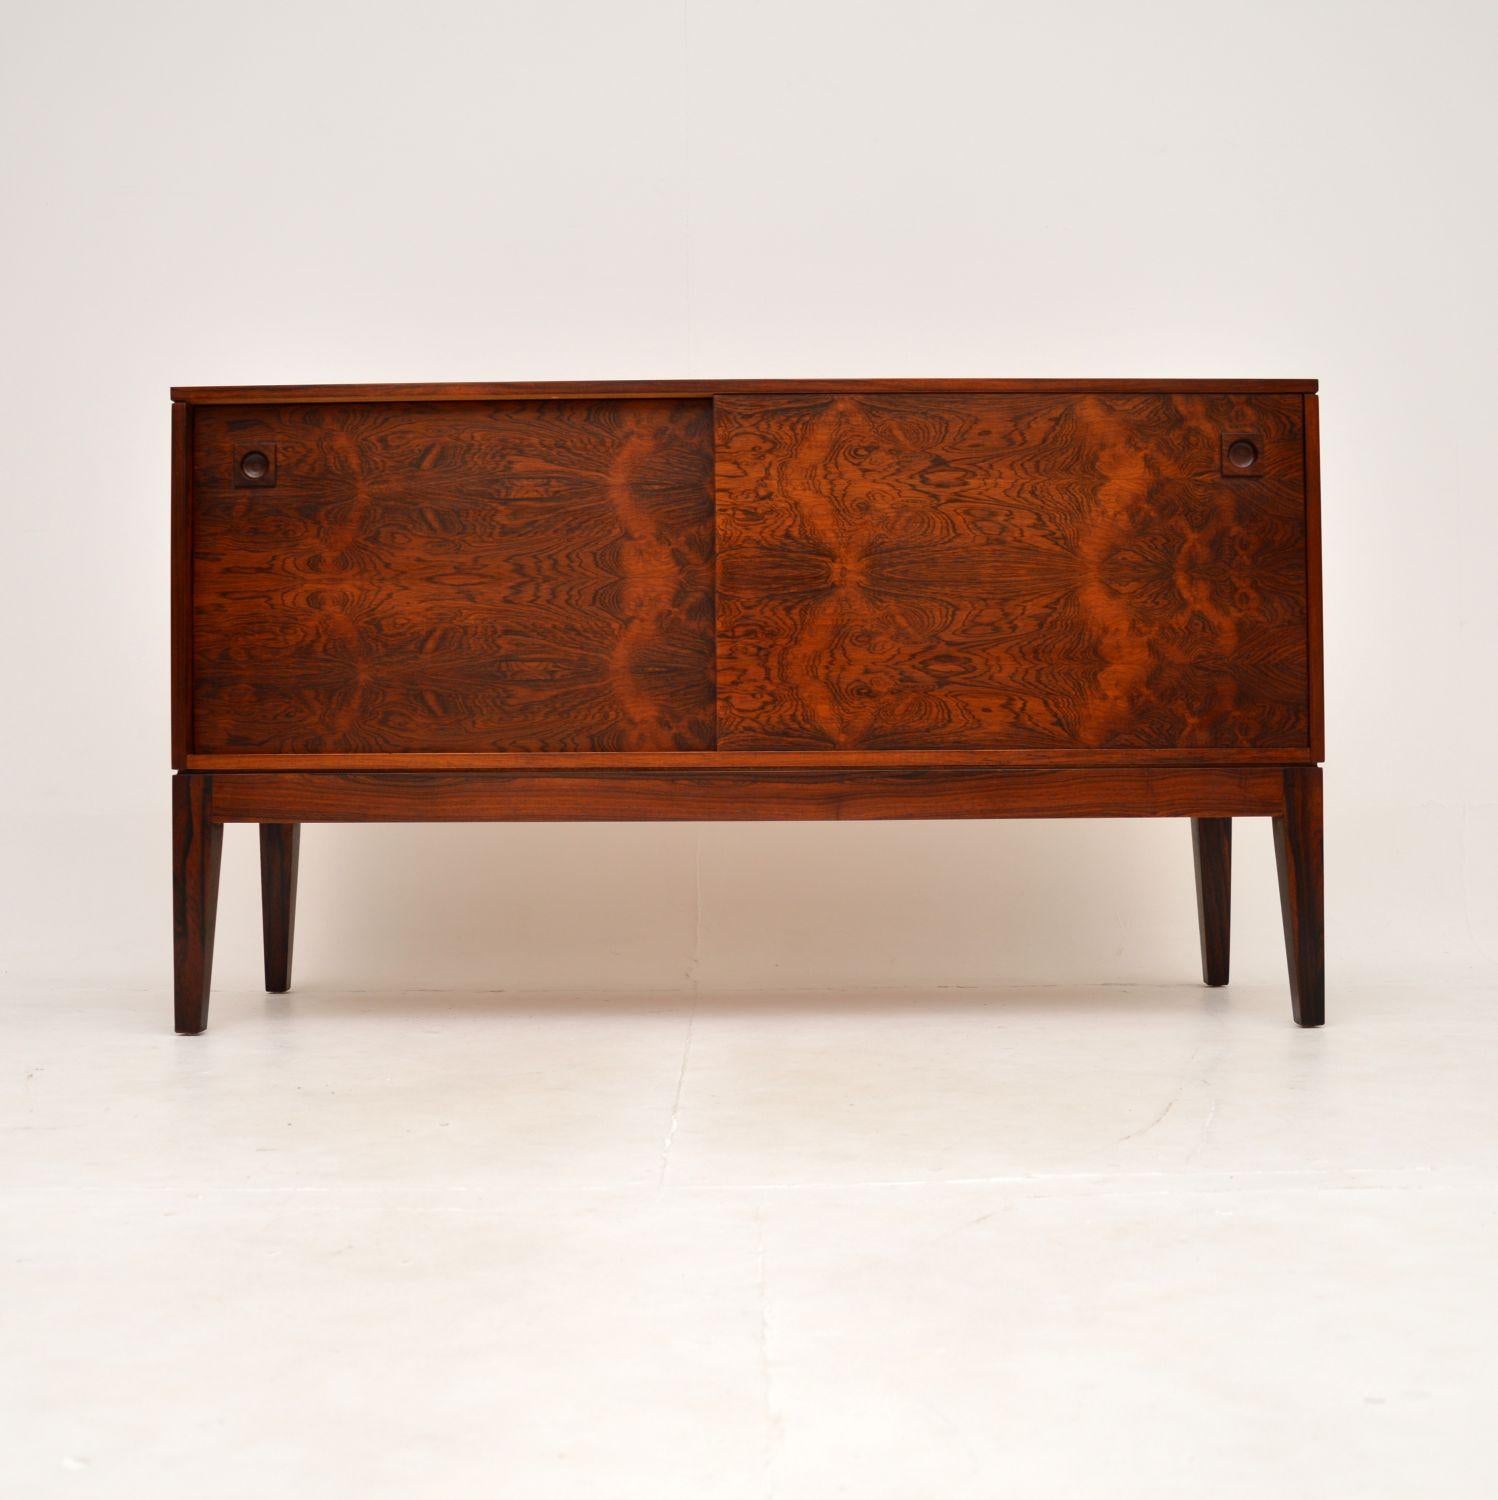 A stunning vintage sideboard by Robert Heritage for Archie Shine. This was made in England, it dates from the 1960’s.

It is of amazing quality and is a very useful size, the grain patterns and colour tones are absolutely gorgeous. The two sliding